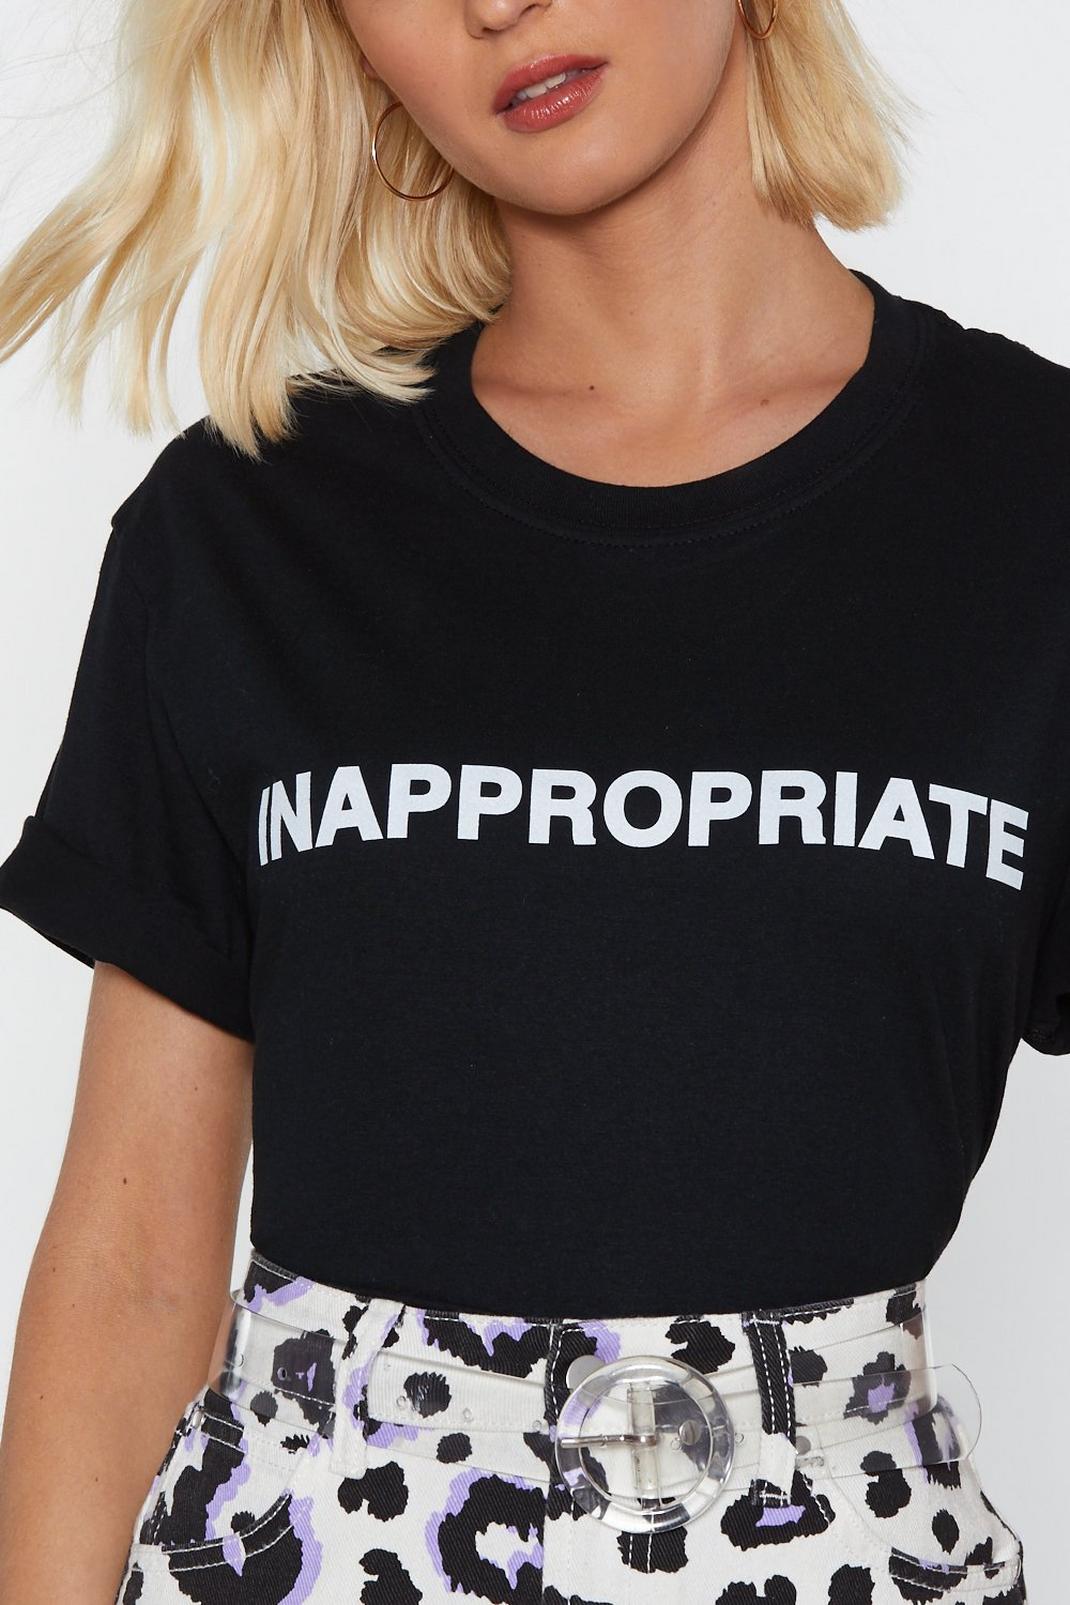 So Inappropriate Graphic Tee | Nasty Gal